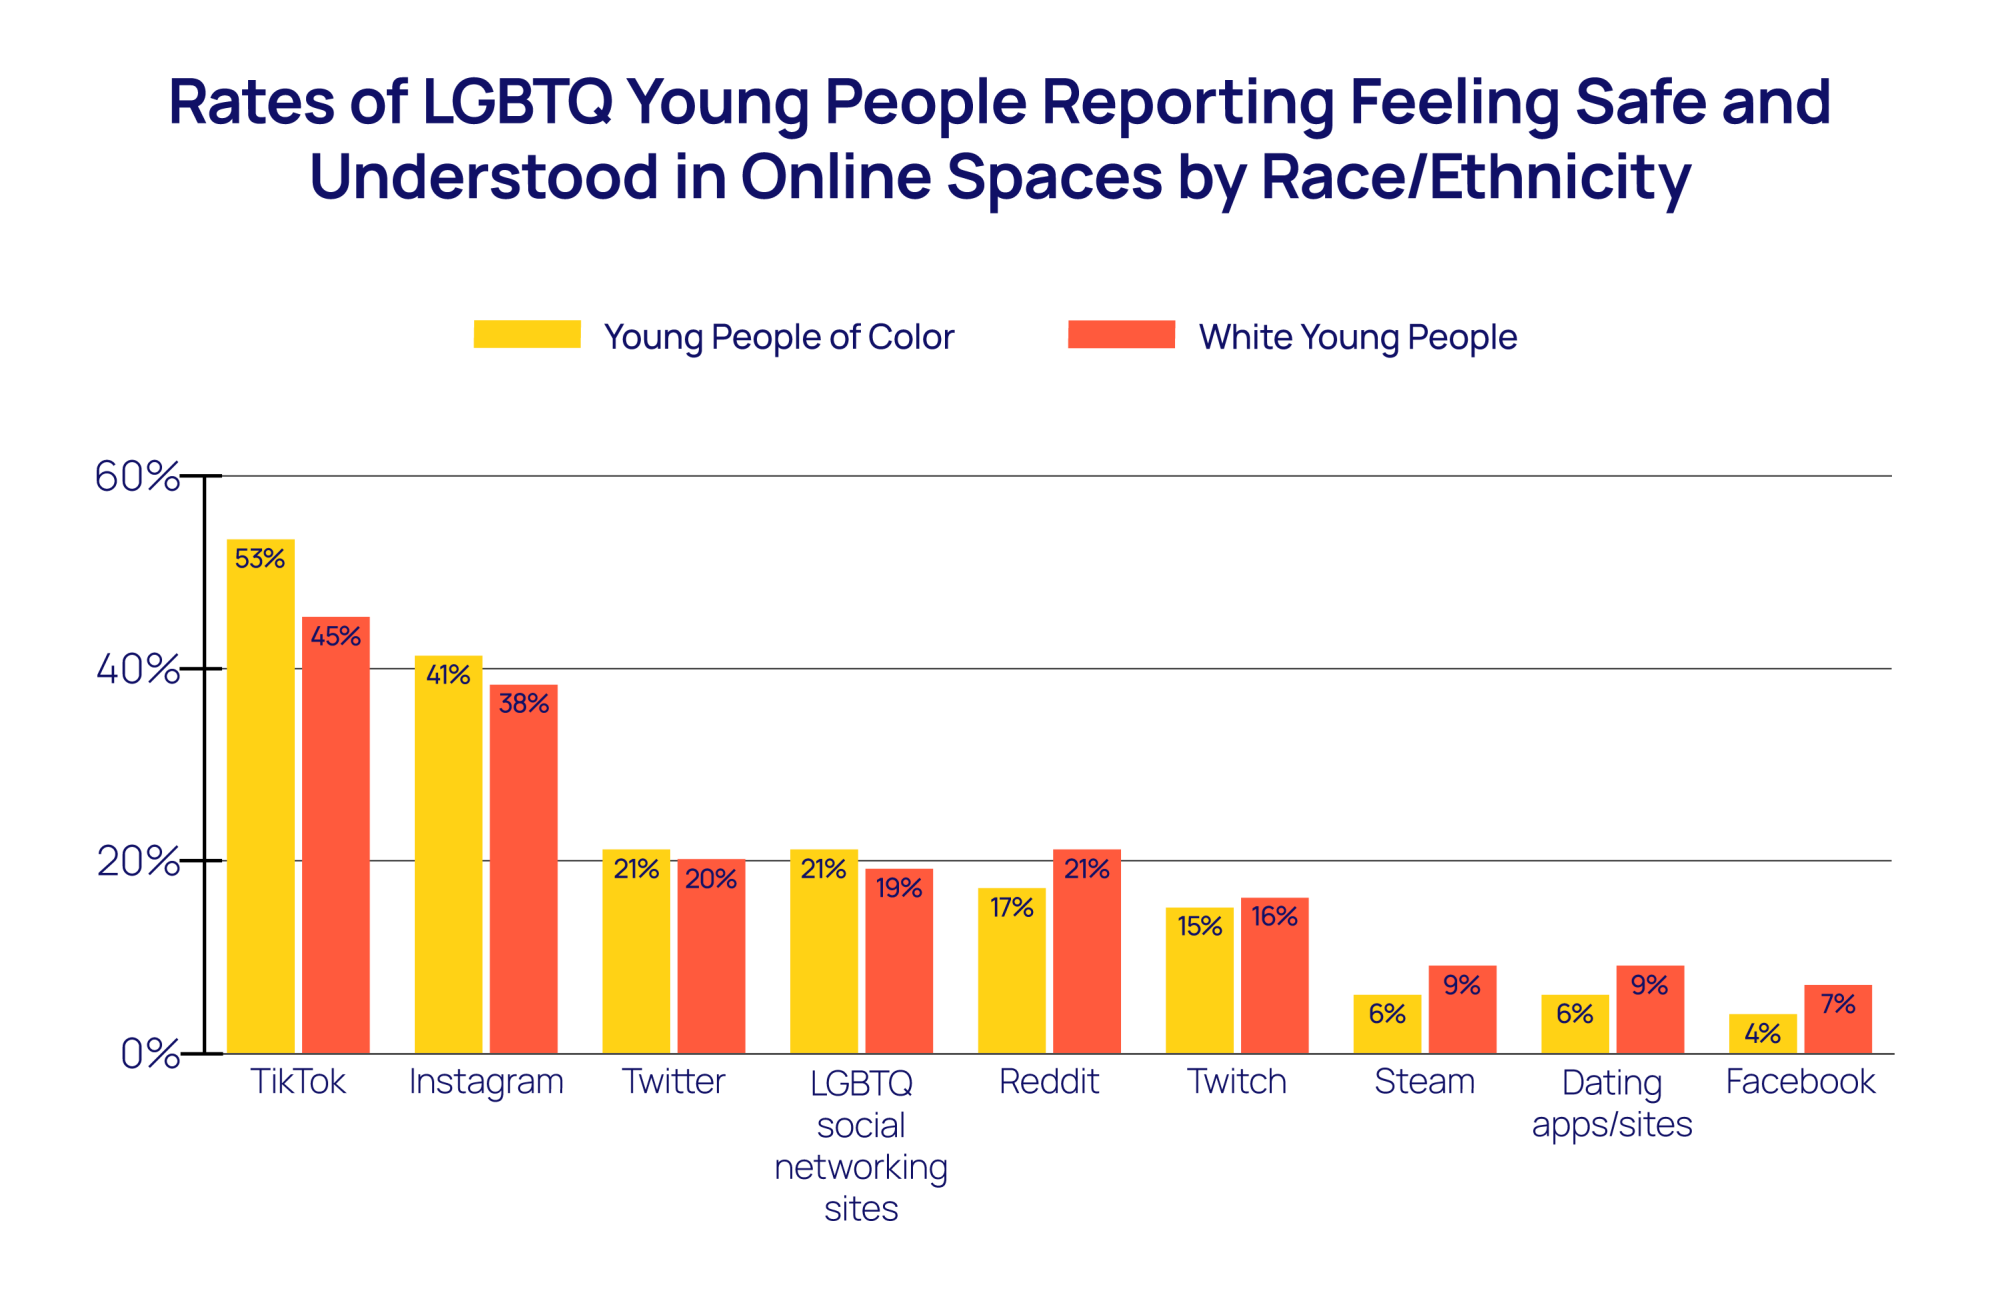 A bar graph showing rates of LGBTQ young people reporting safe and understood in online spaces by race and ethnicity.